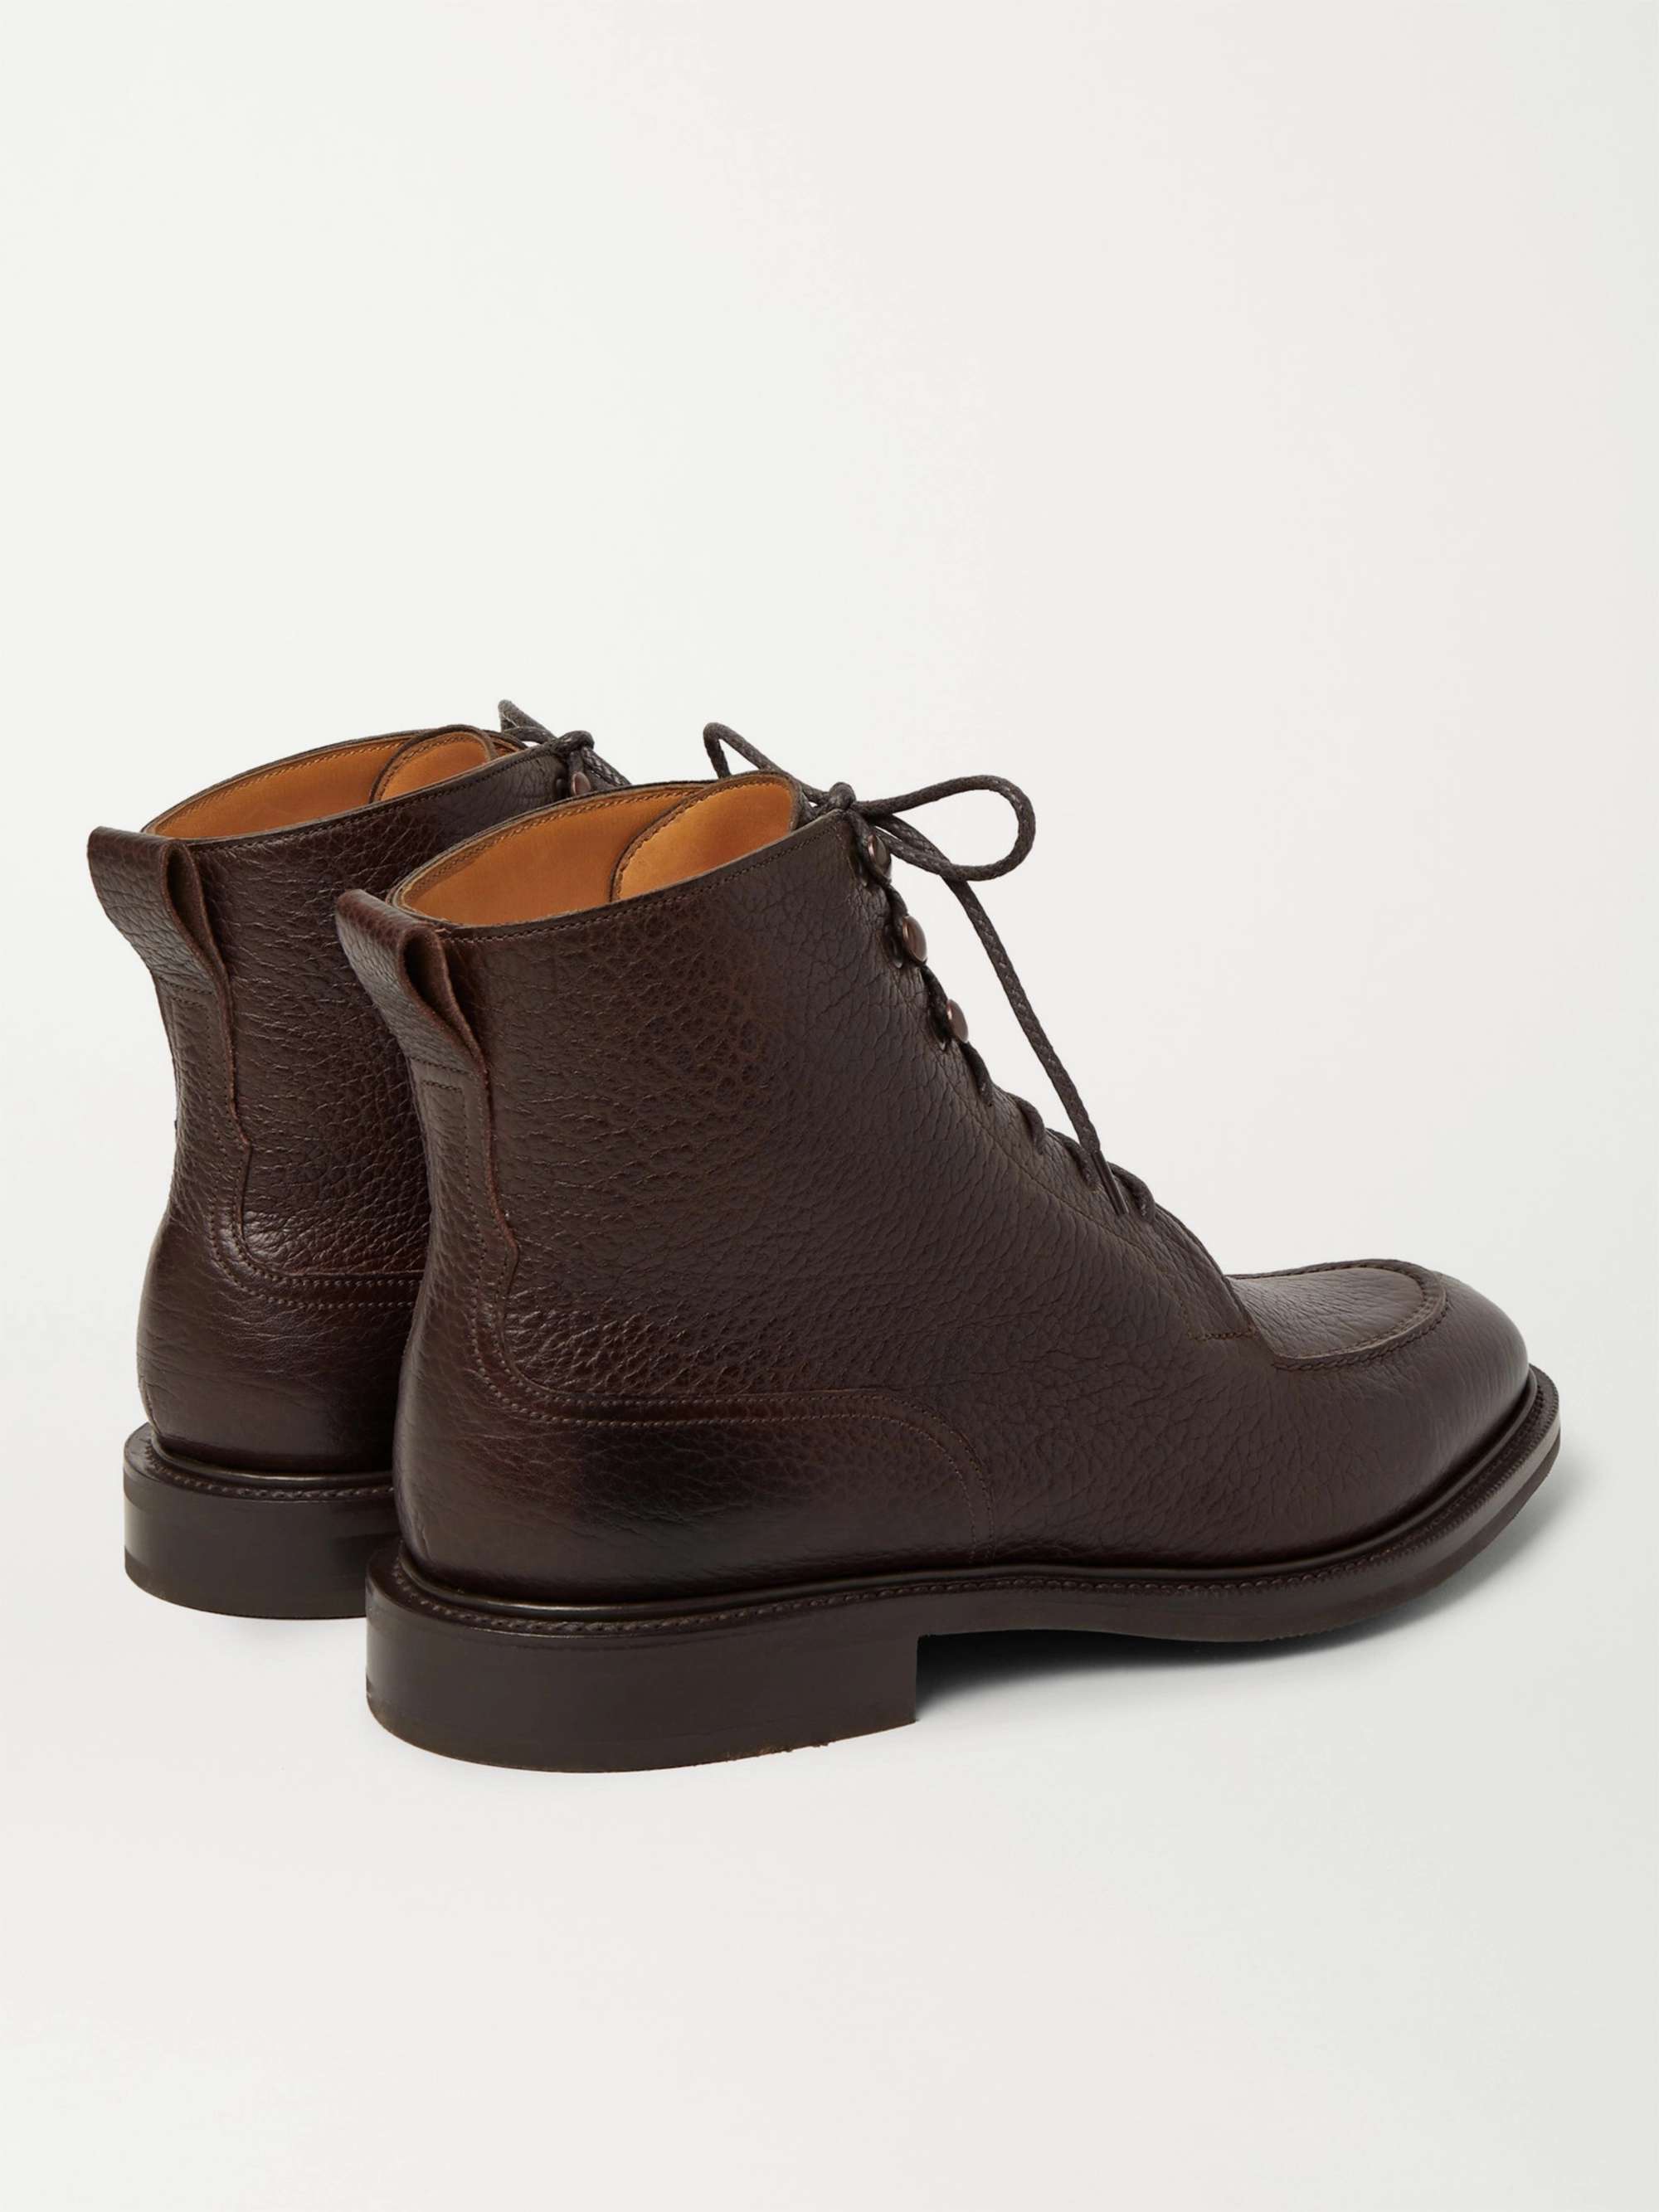 EDWARD GREEN Cranleigh Shearling-Lined Full-Grain Leather Boots